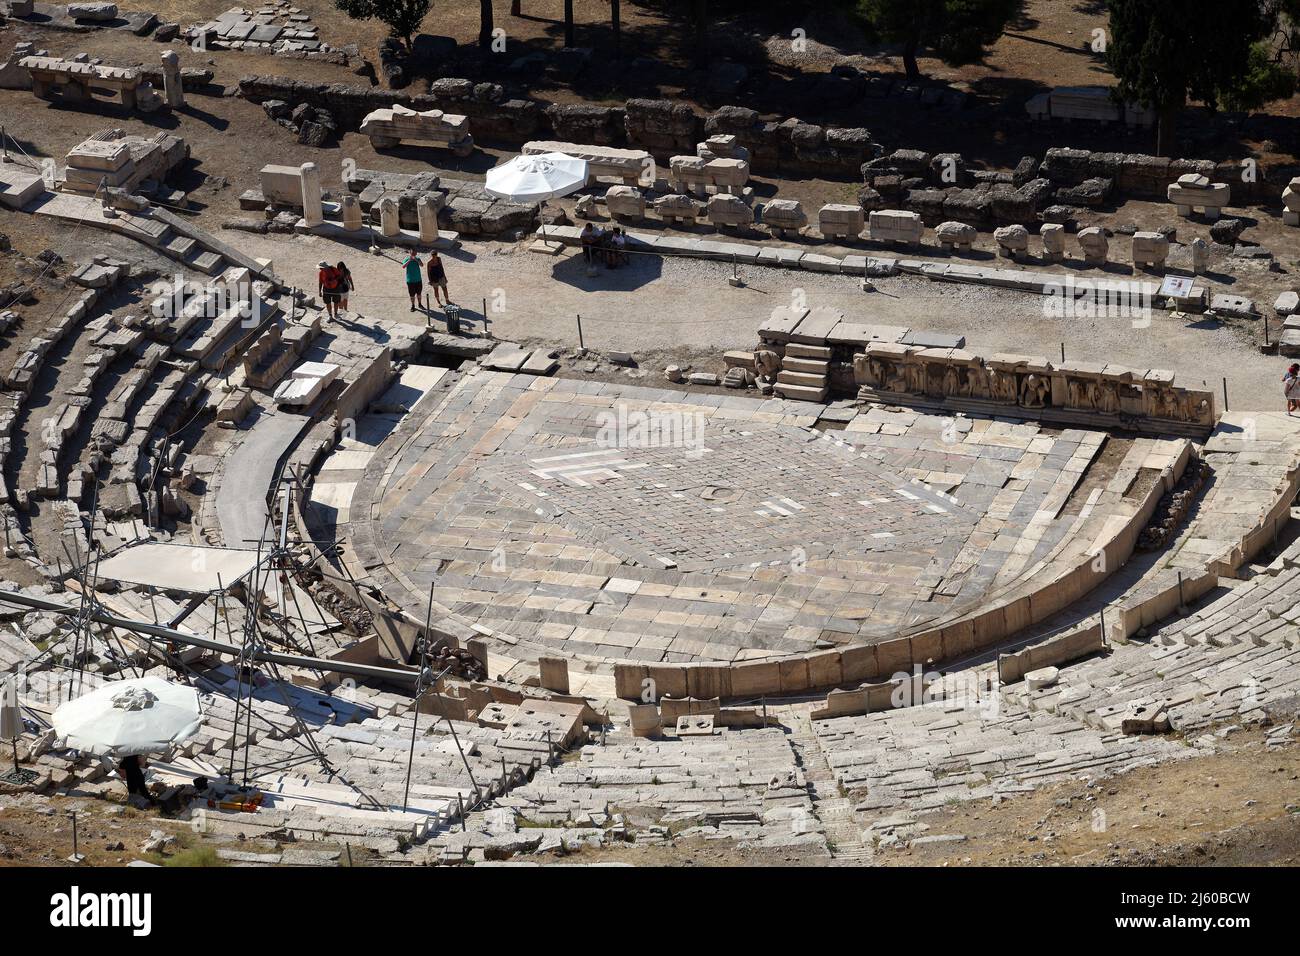 Theatre of Dionysus at Acropolis in Athens, Greece. It is built on the south slope of the Acropolis Hill. Stock Photo